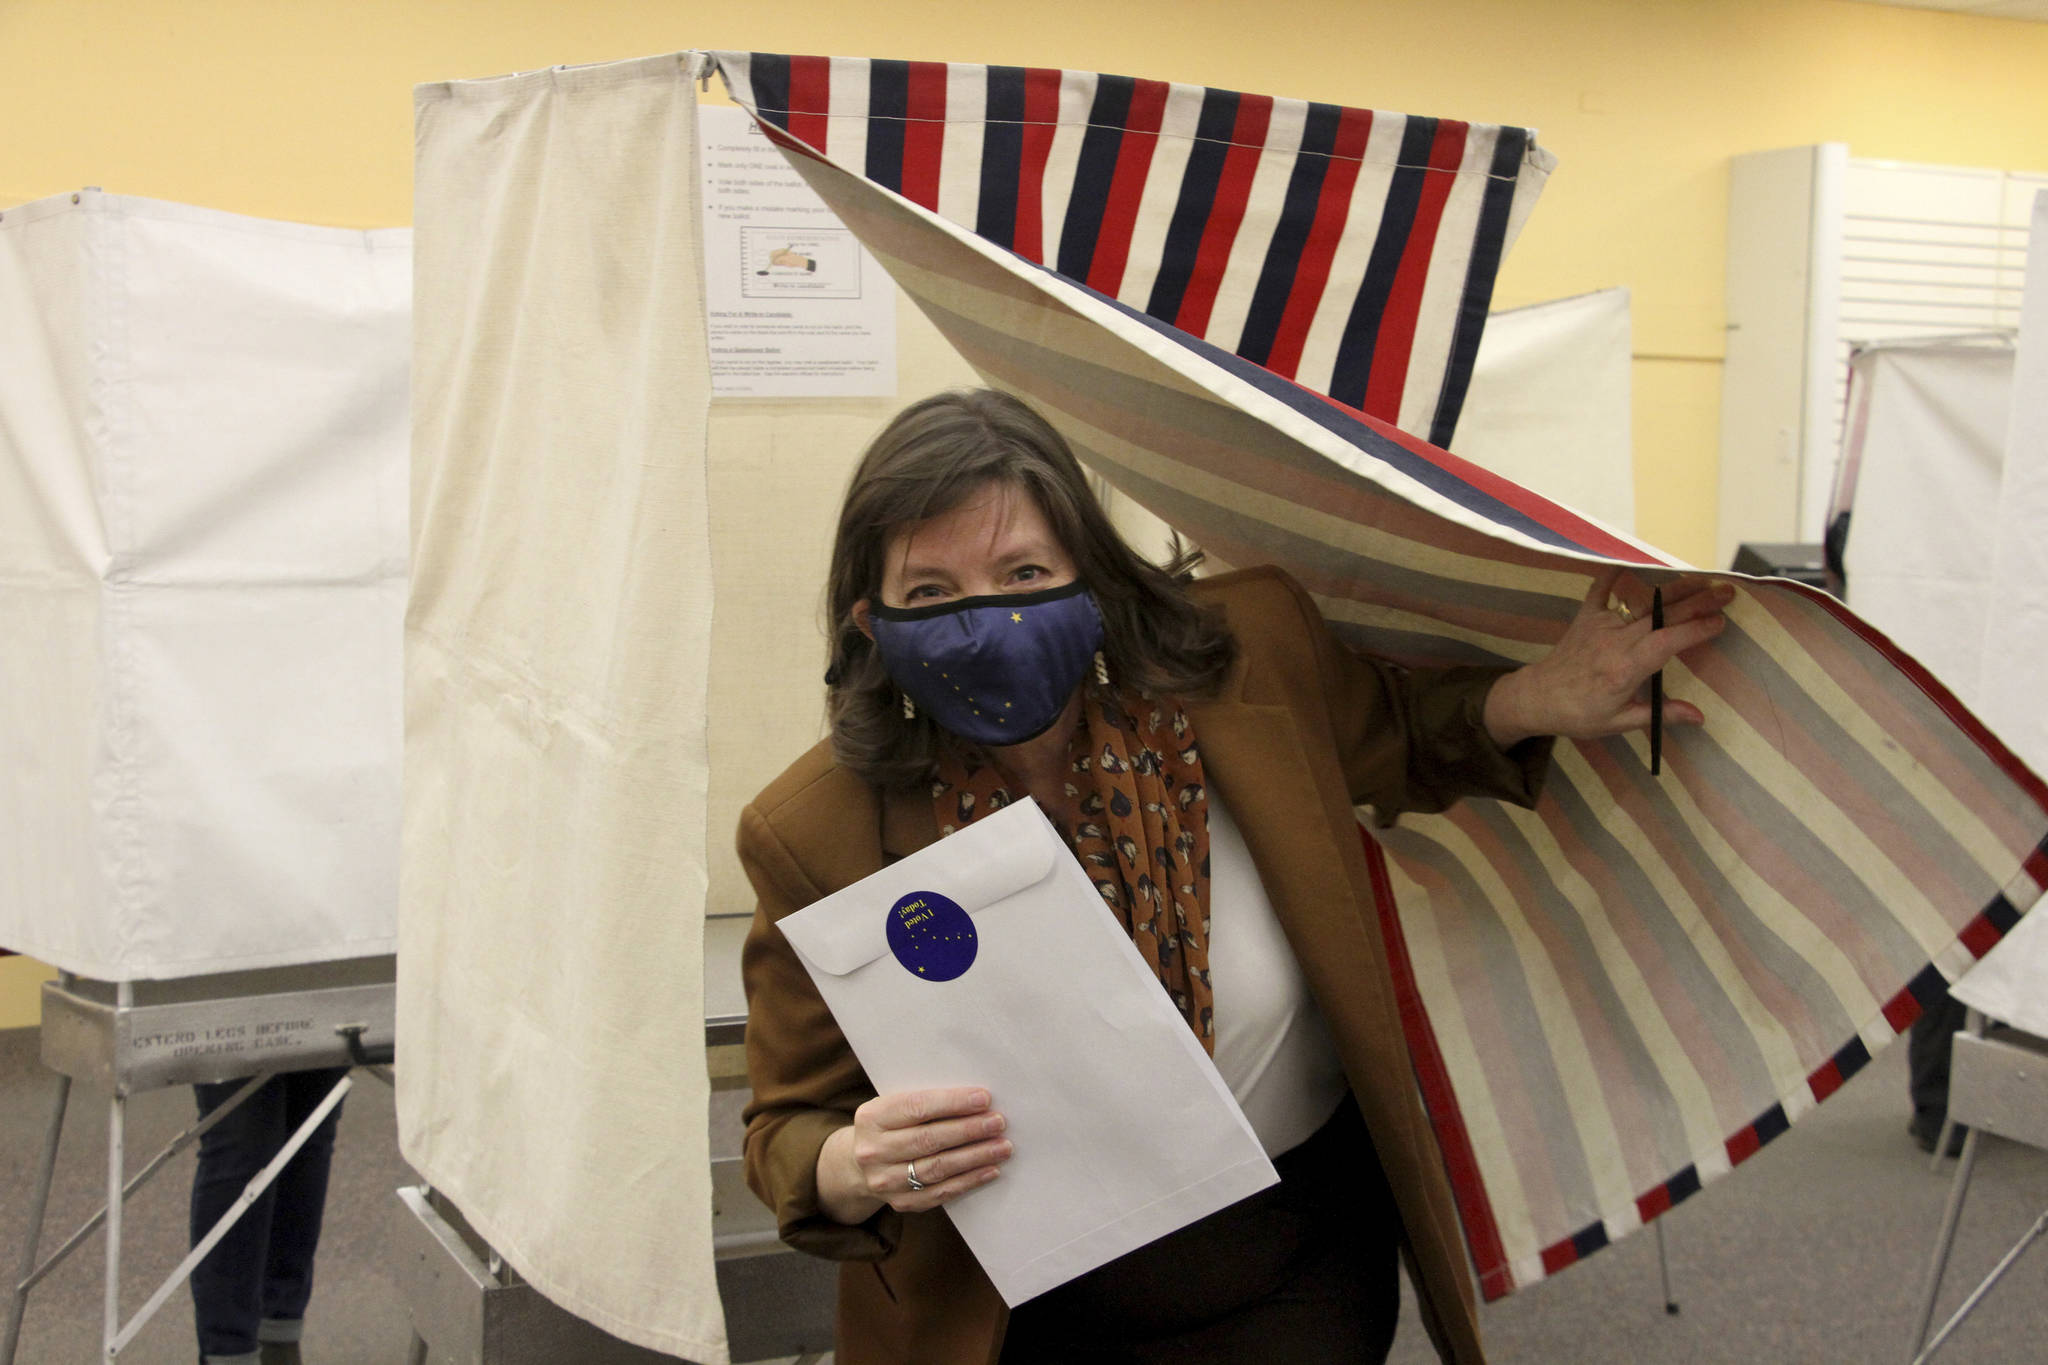 Alyse Galvin emerges from the voting booth after casting her early vote Friday, Oct. 30, 2020, in Anchorage, Alaska. Galvin, an independent, is trying to unseat U.S. Rep. Don Young, Alaska’s sole member of the U.S. House and in office since 1973. (AP Photo / Mark Thiessen)